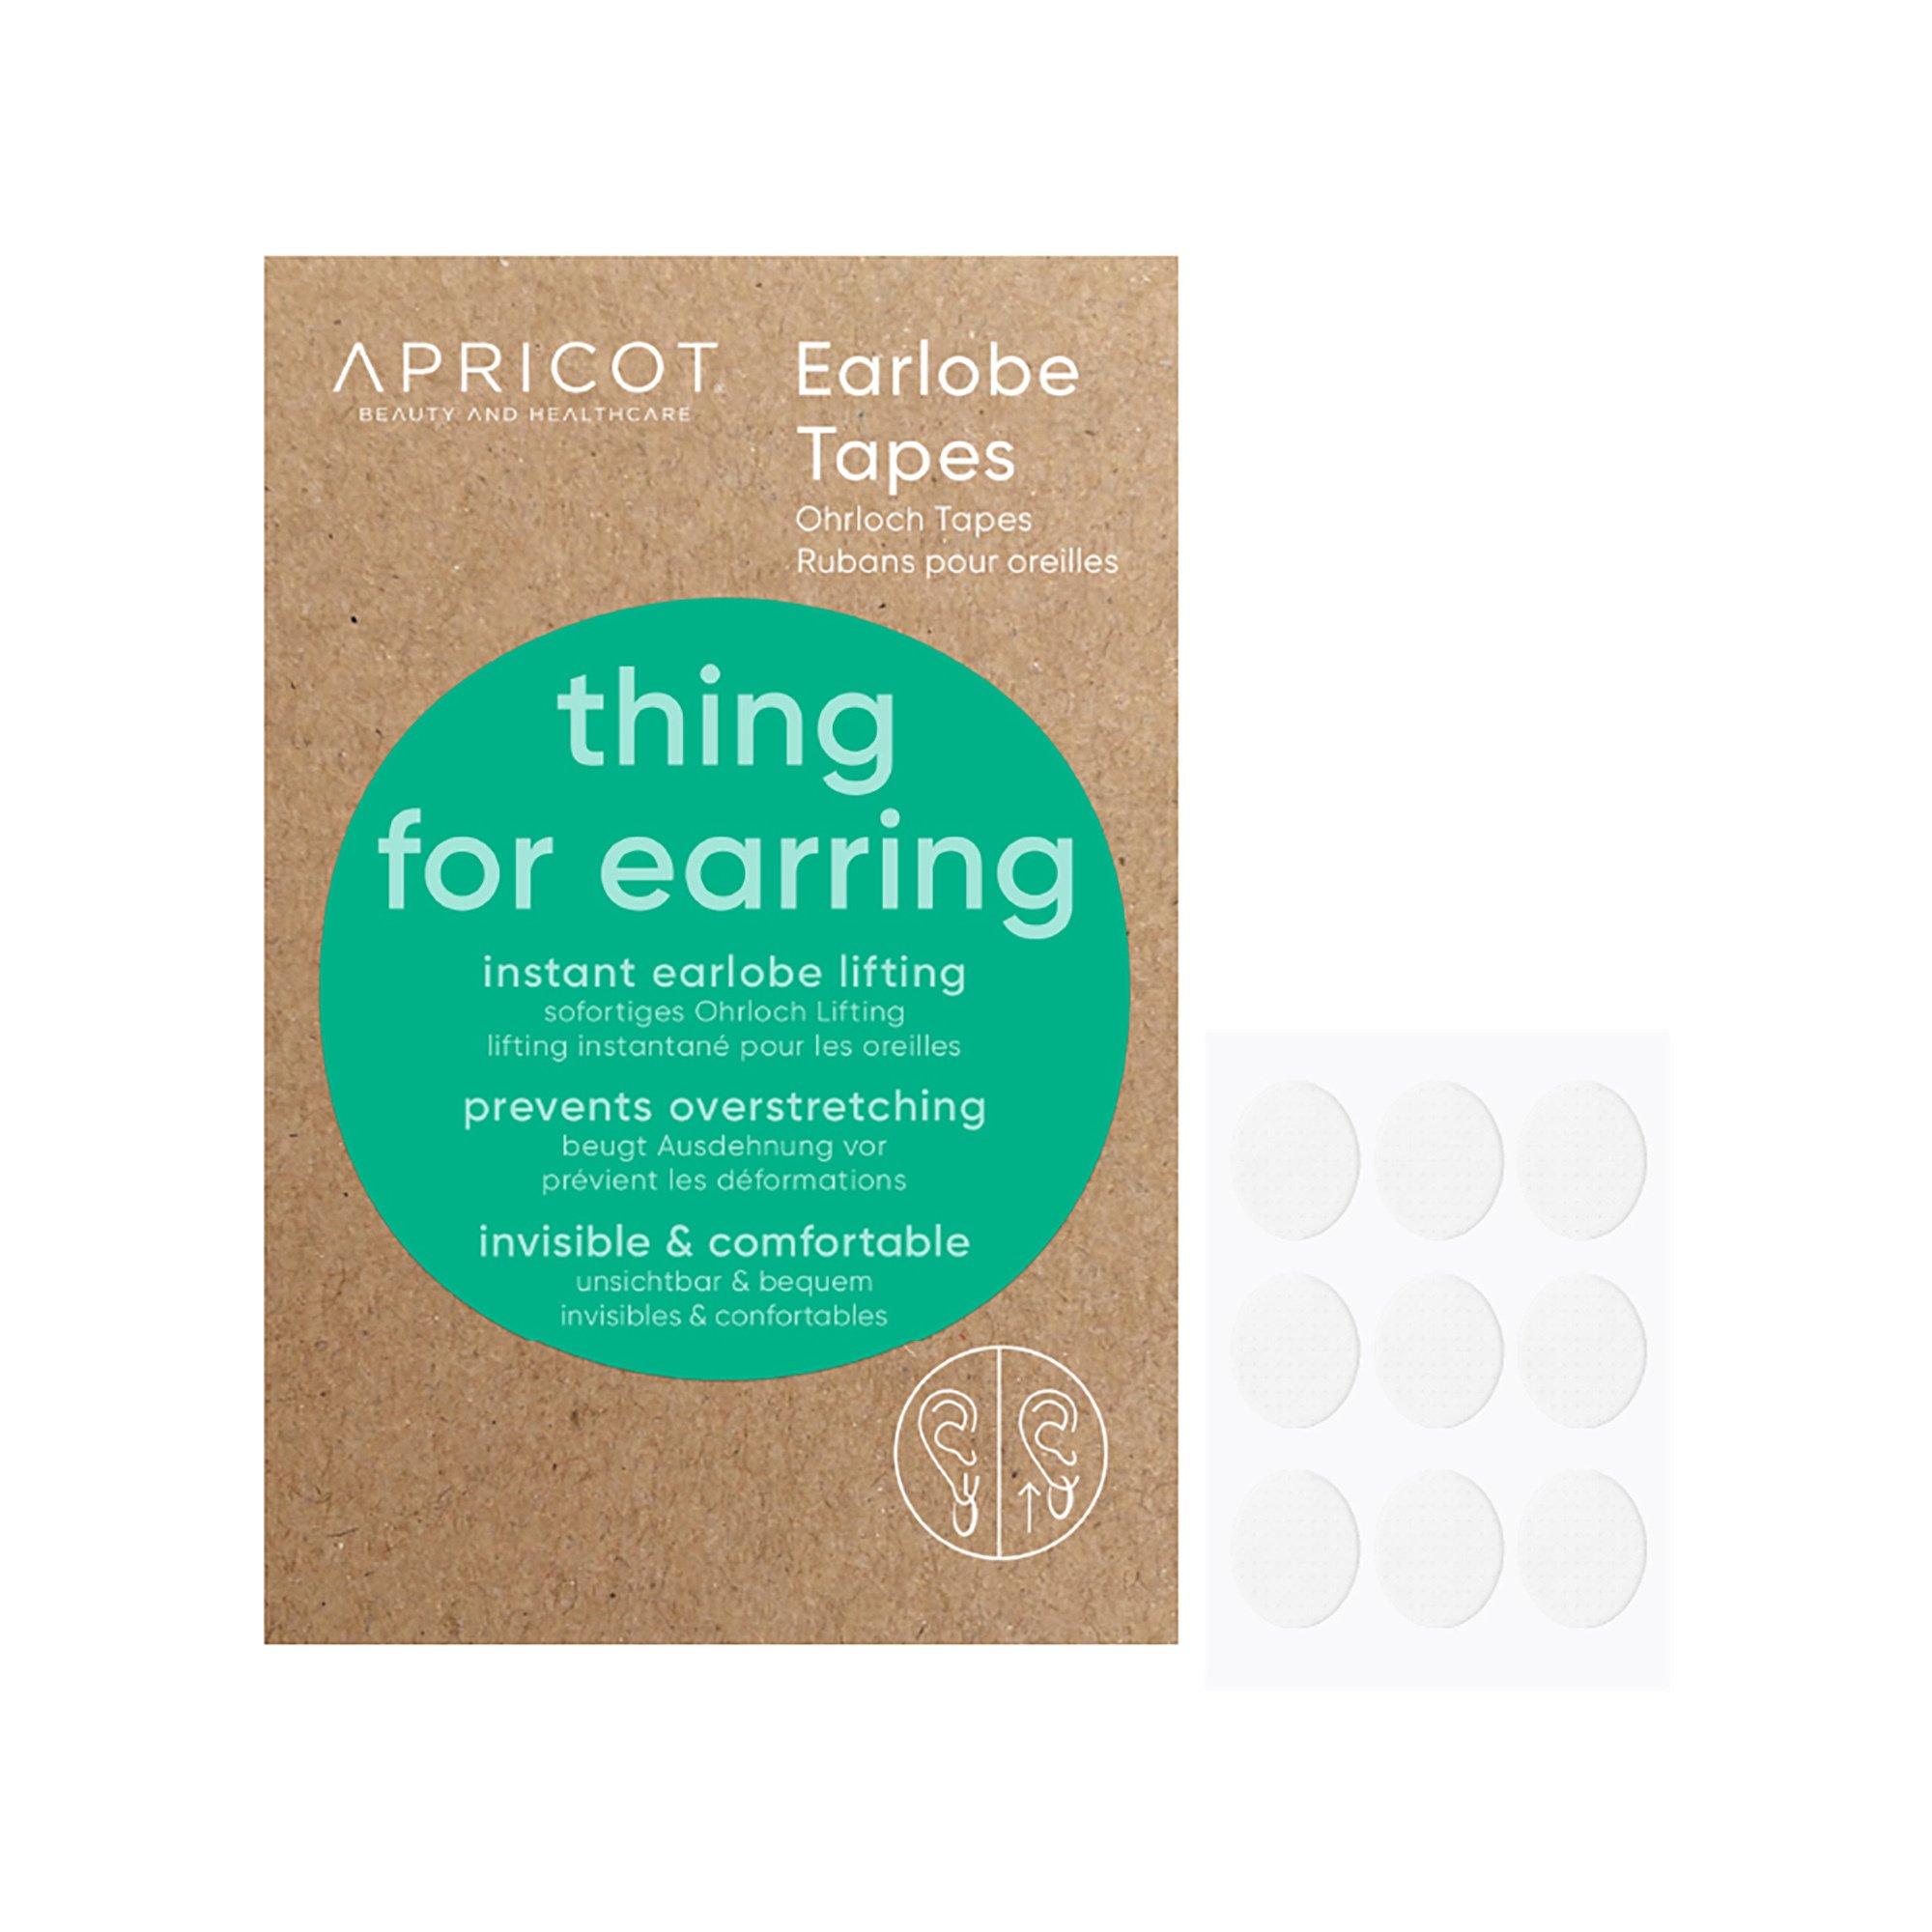 Image of APRICOT Earlobe Tapes - Thing For Earring - 60 Pezzi